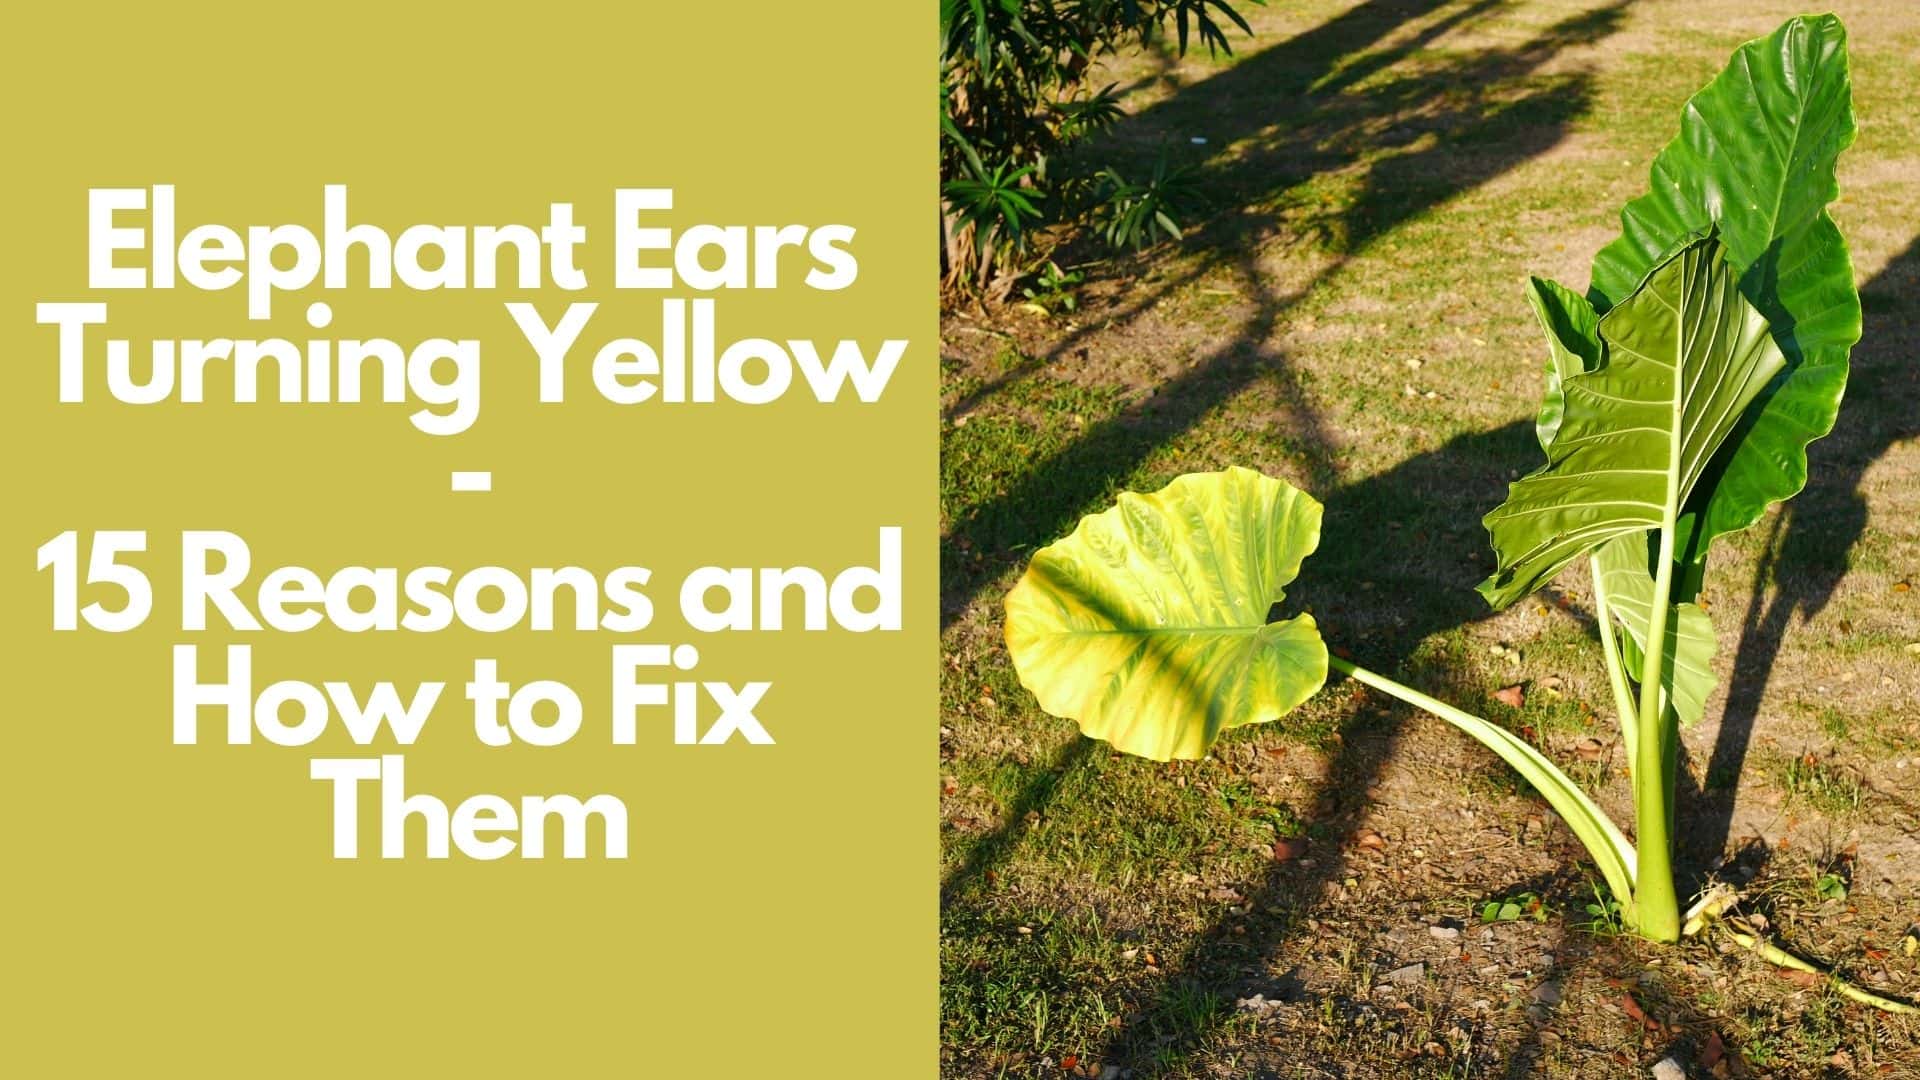 Elephant Ears Turning Yellow: 15 Reasons and How to Fix Them